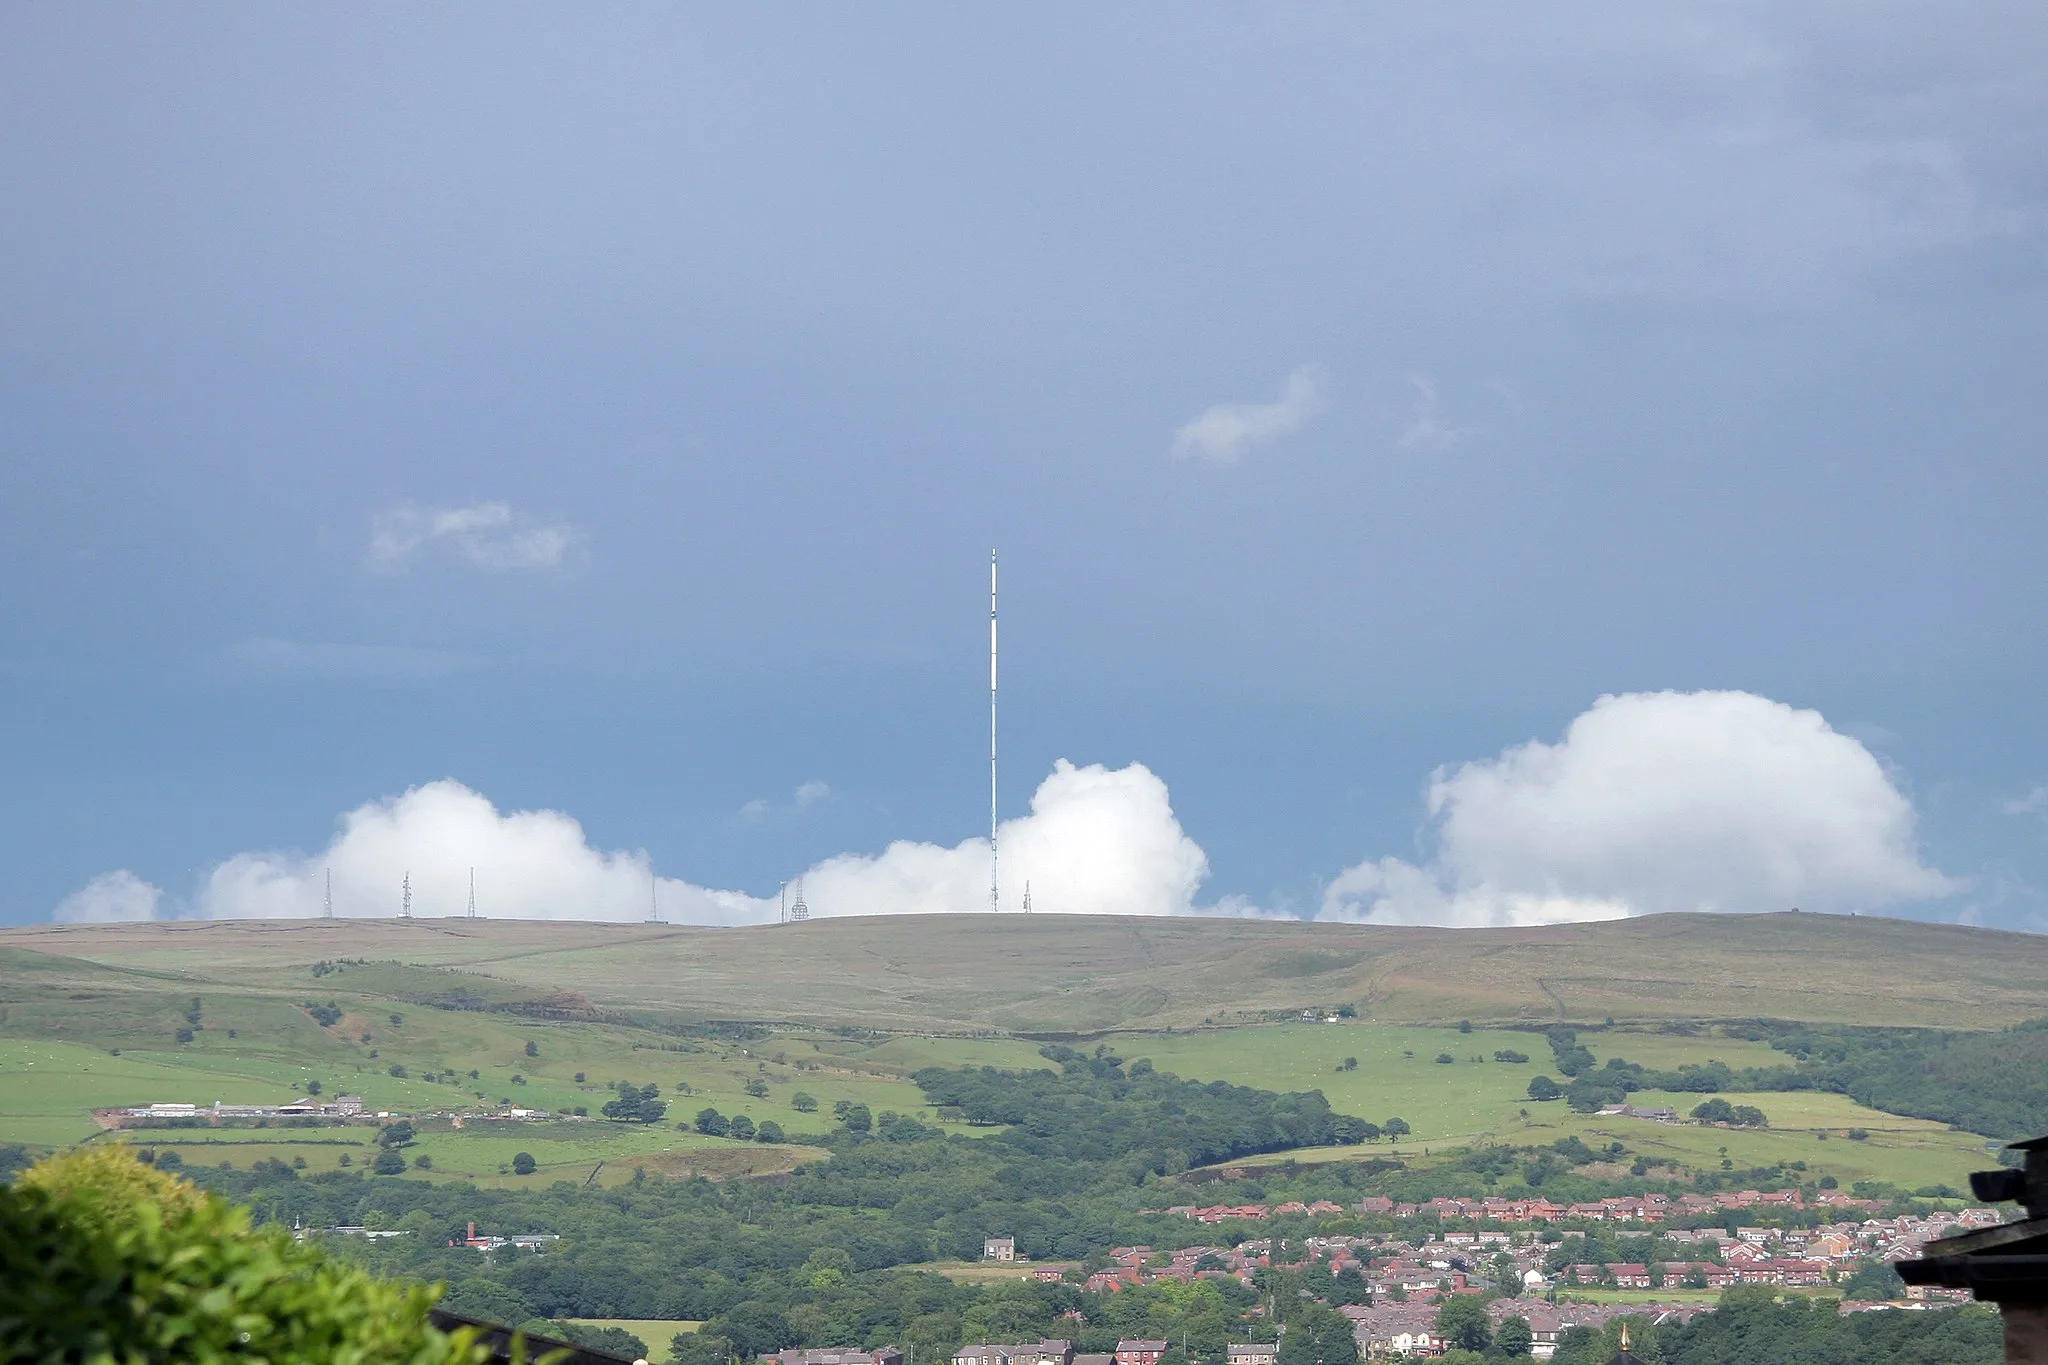 Photo showing: Winter Hill viewed from Blackrod, Greater Manchester, England. Part of Horwich is visible below the hill.